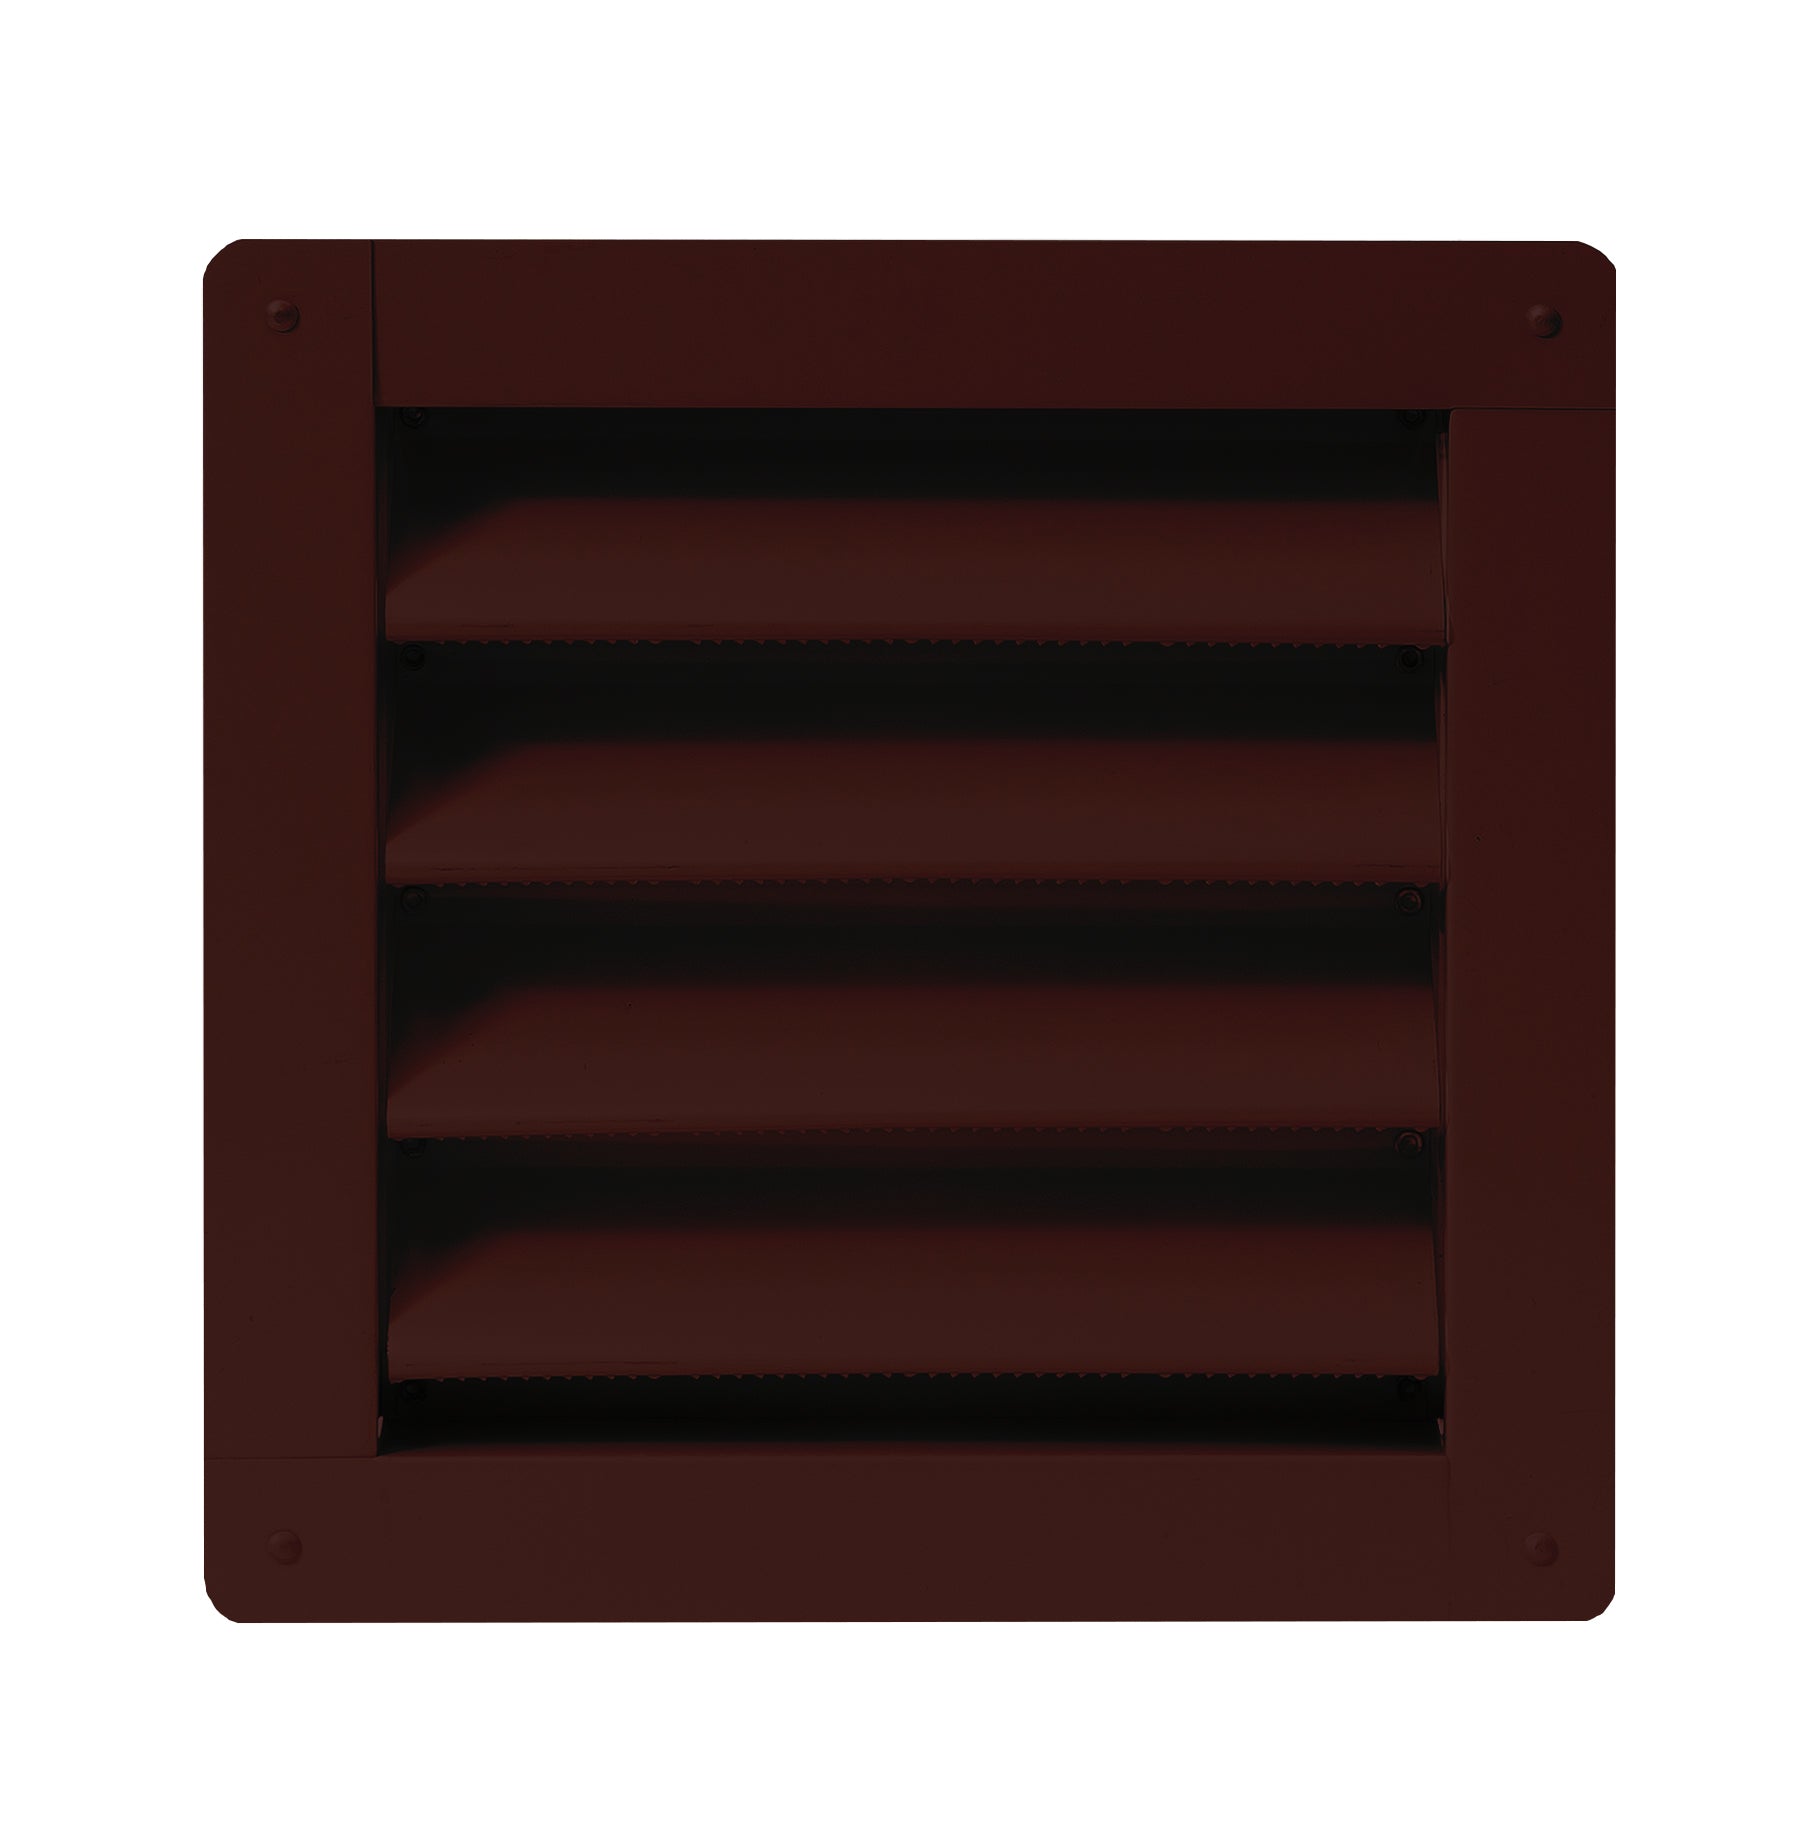 8" x 8" Flush Mount Aluminum Brown Wall Vent for Sheds, Playhouses, and MORE